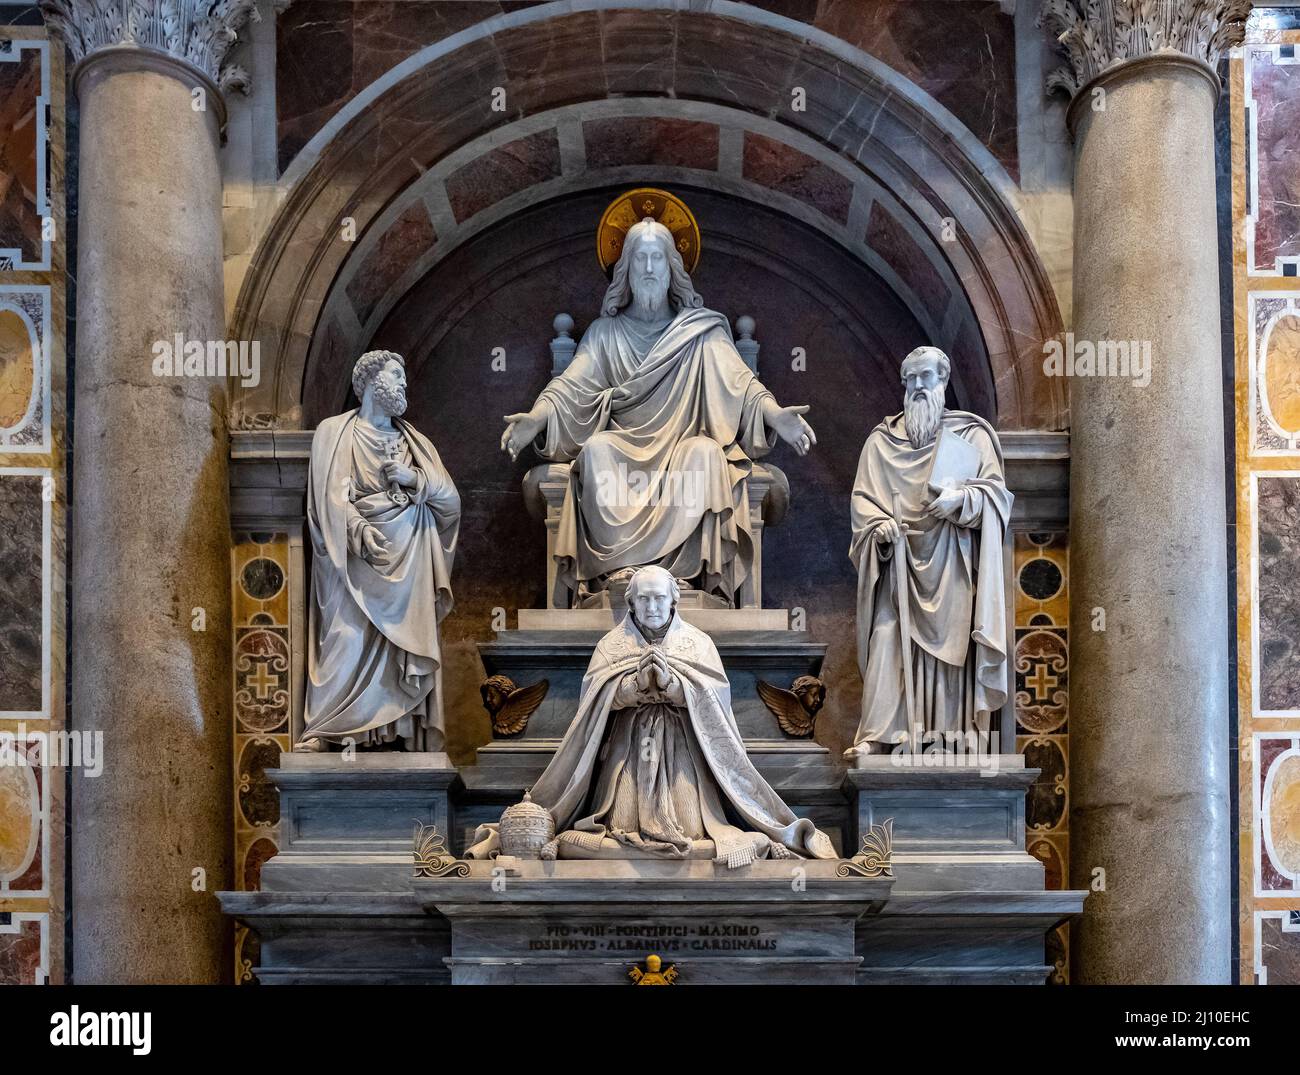 Rome, Italy - May 27, 2018: Monument of pope Pius VIII Francesco Castiglioni by Pietro Tenerani, at right nave of papal St. Peter's Basilica Stock Photo